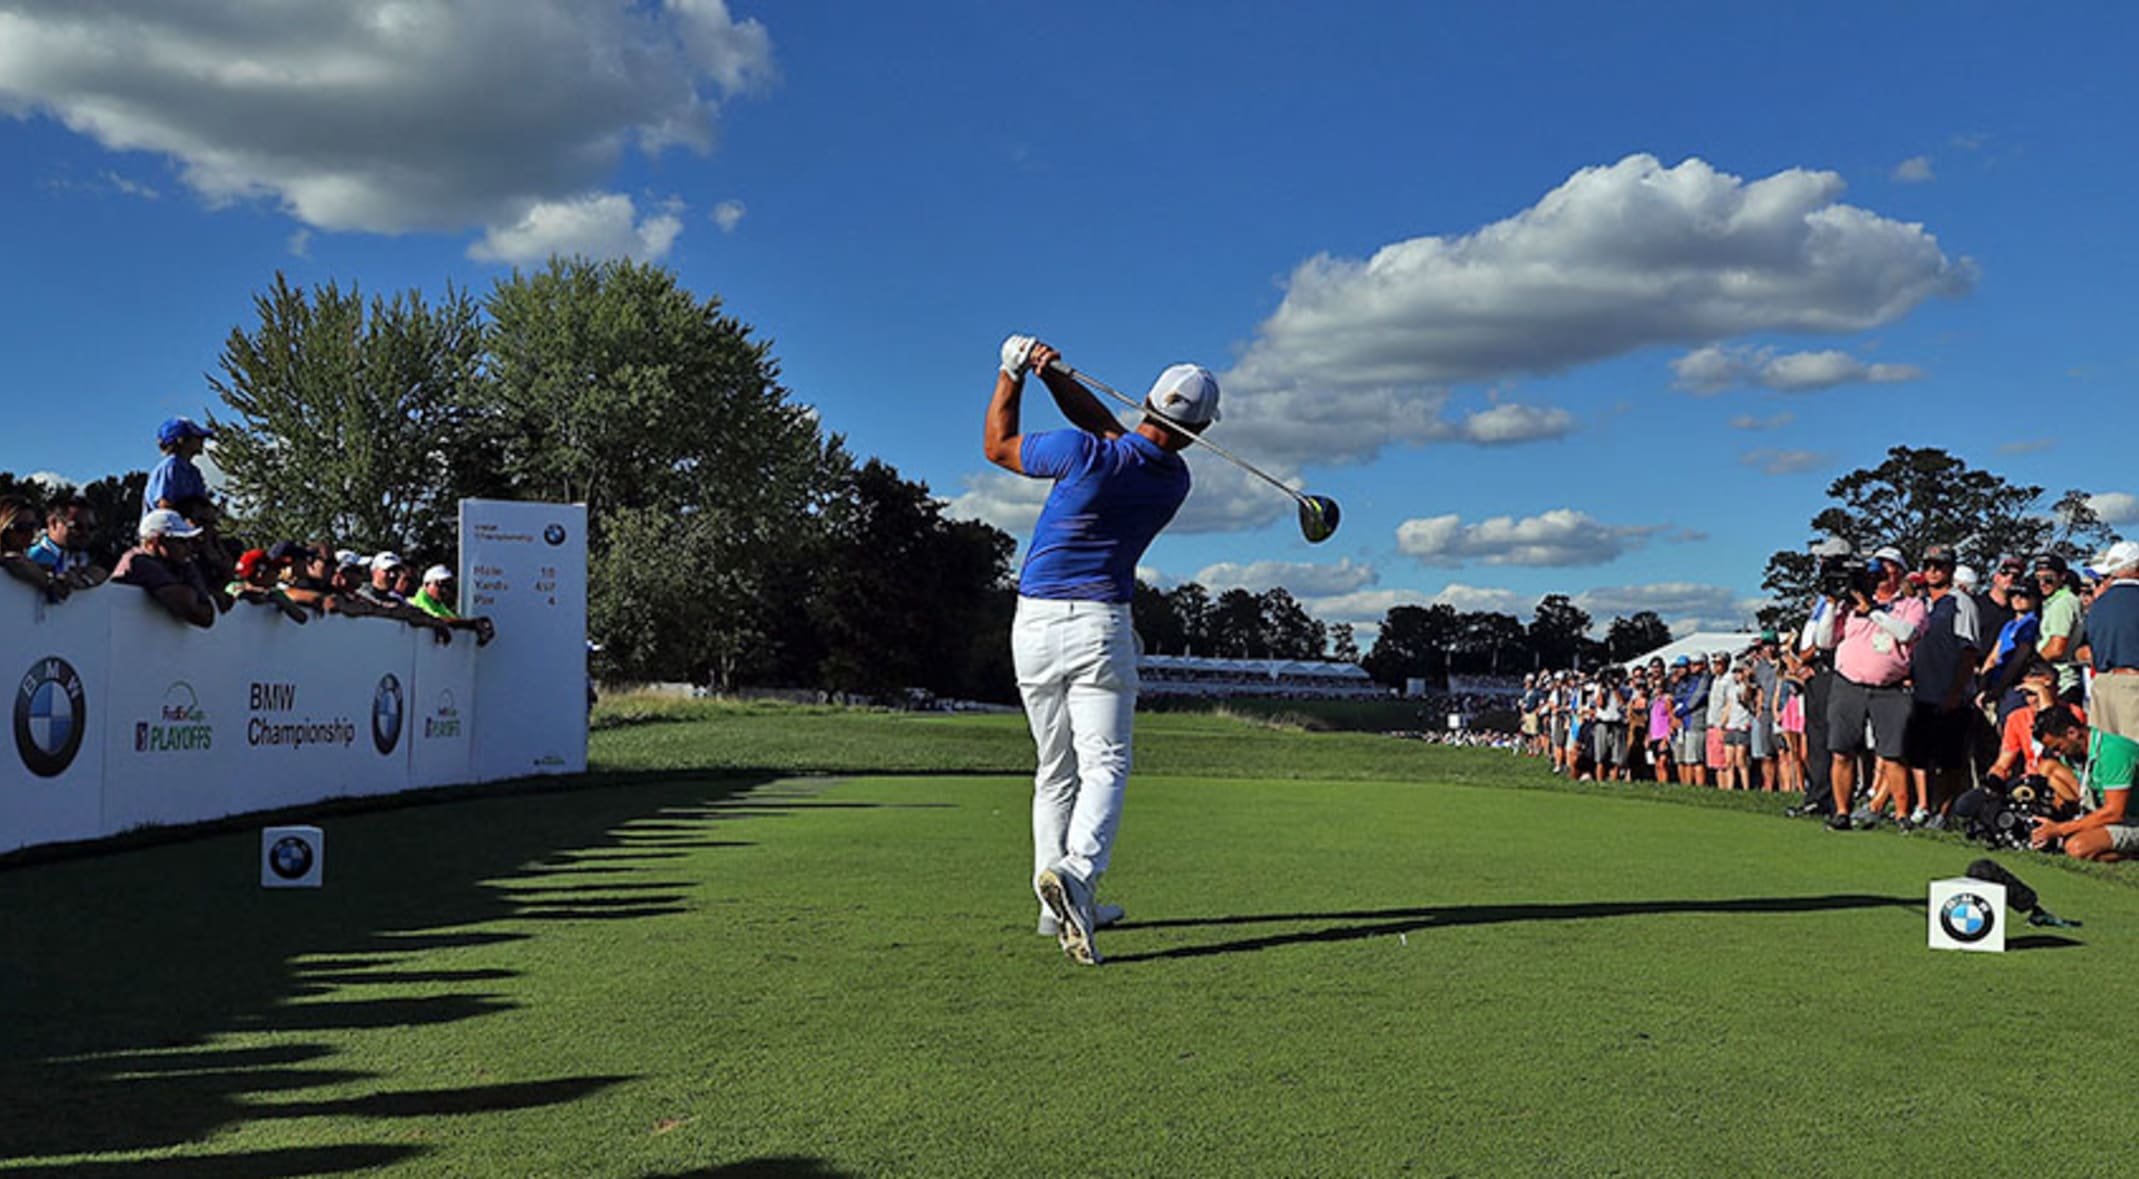 2016 Pga Tour Schedule Examples and Forms